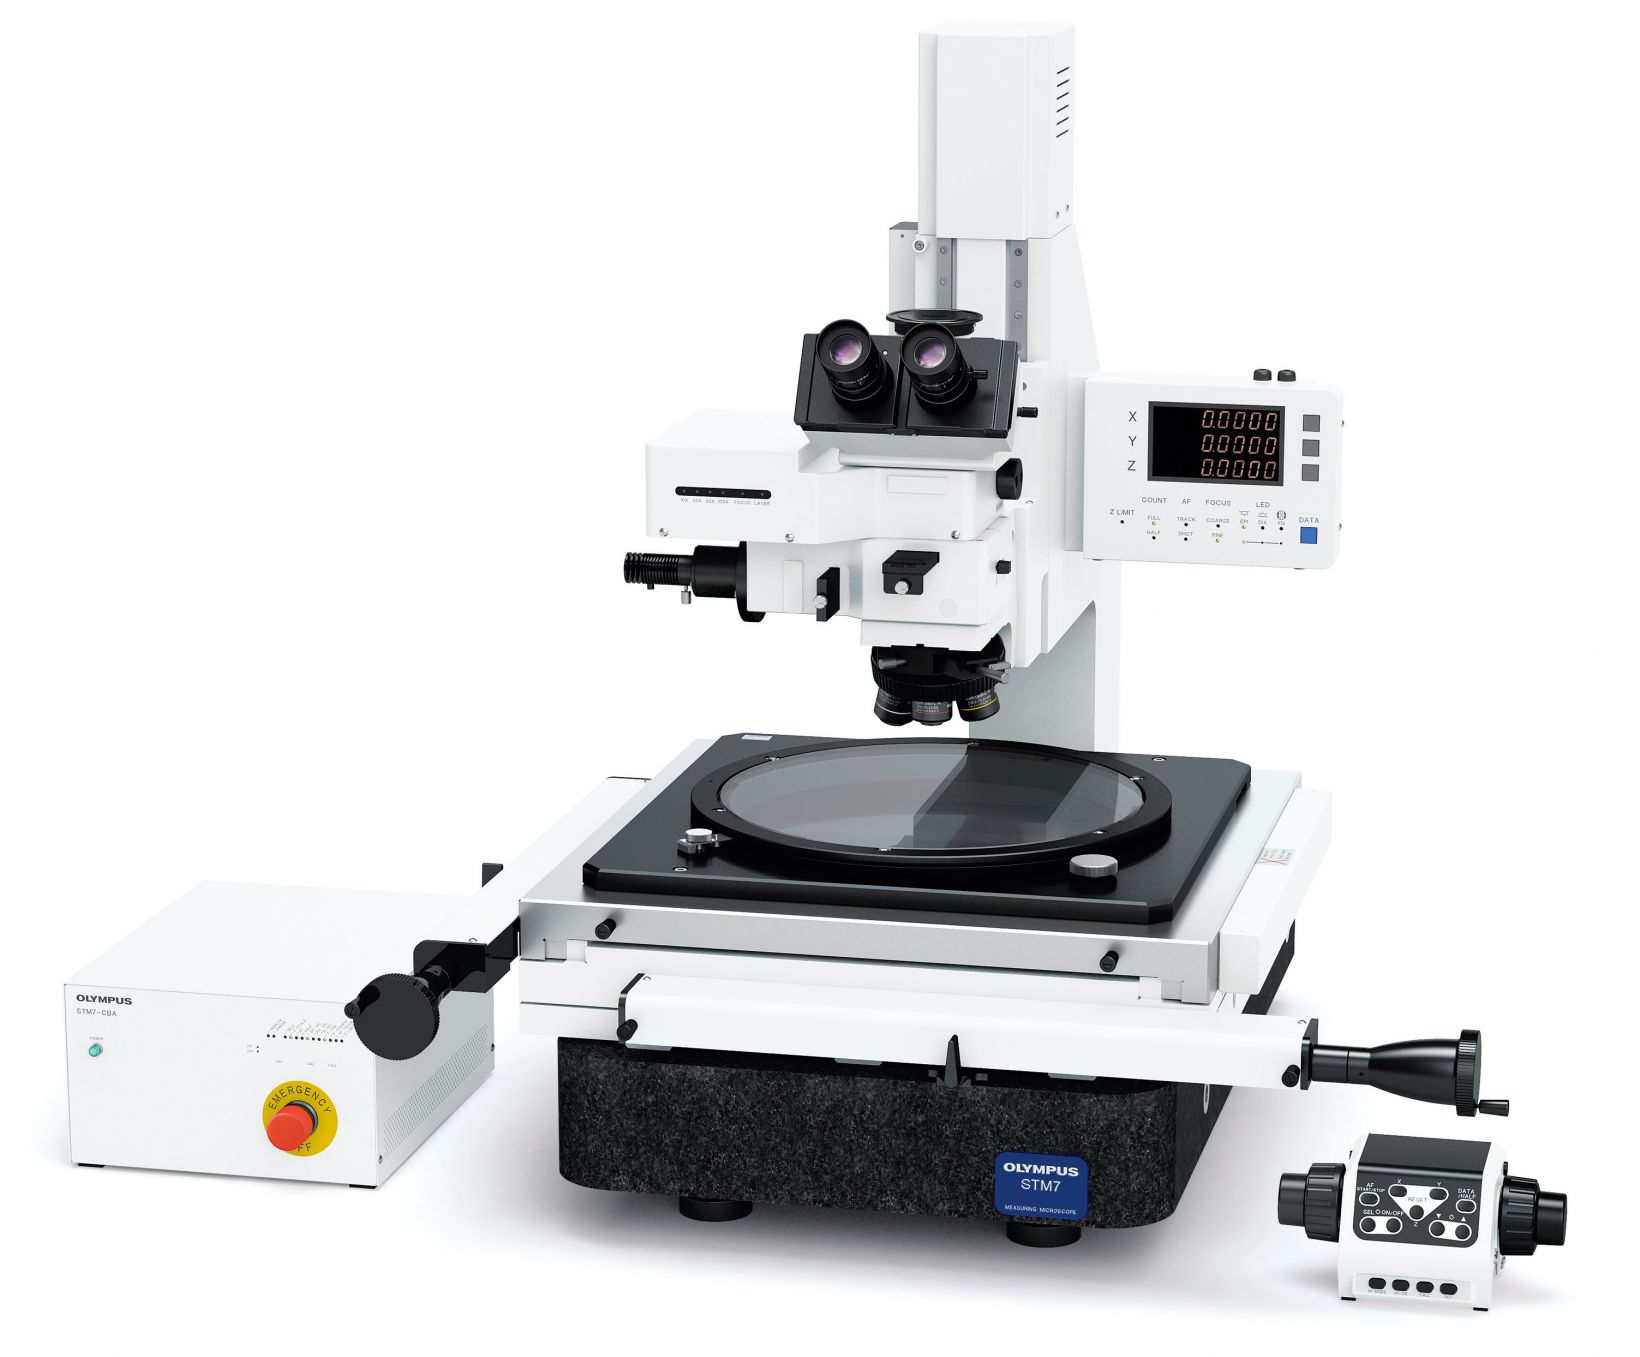 The STM7 measuring microscope.